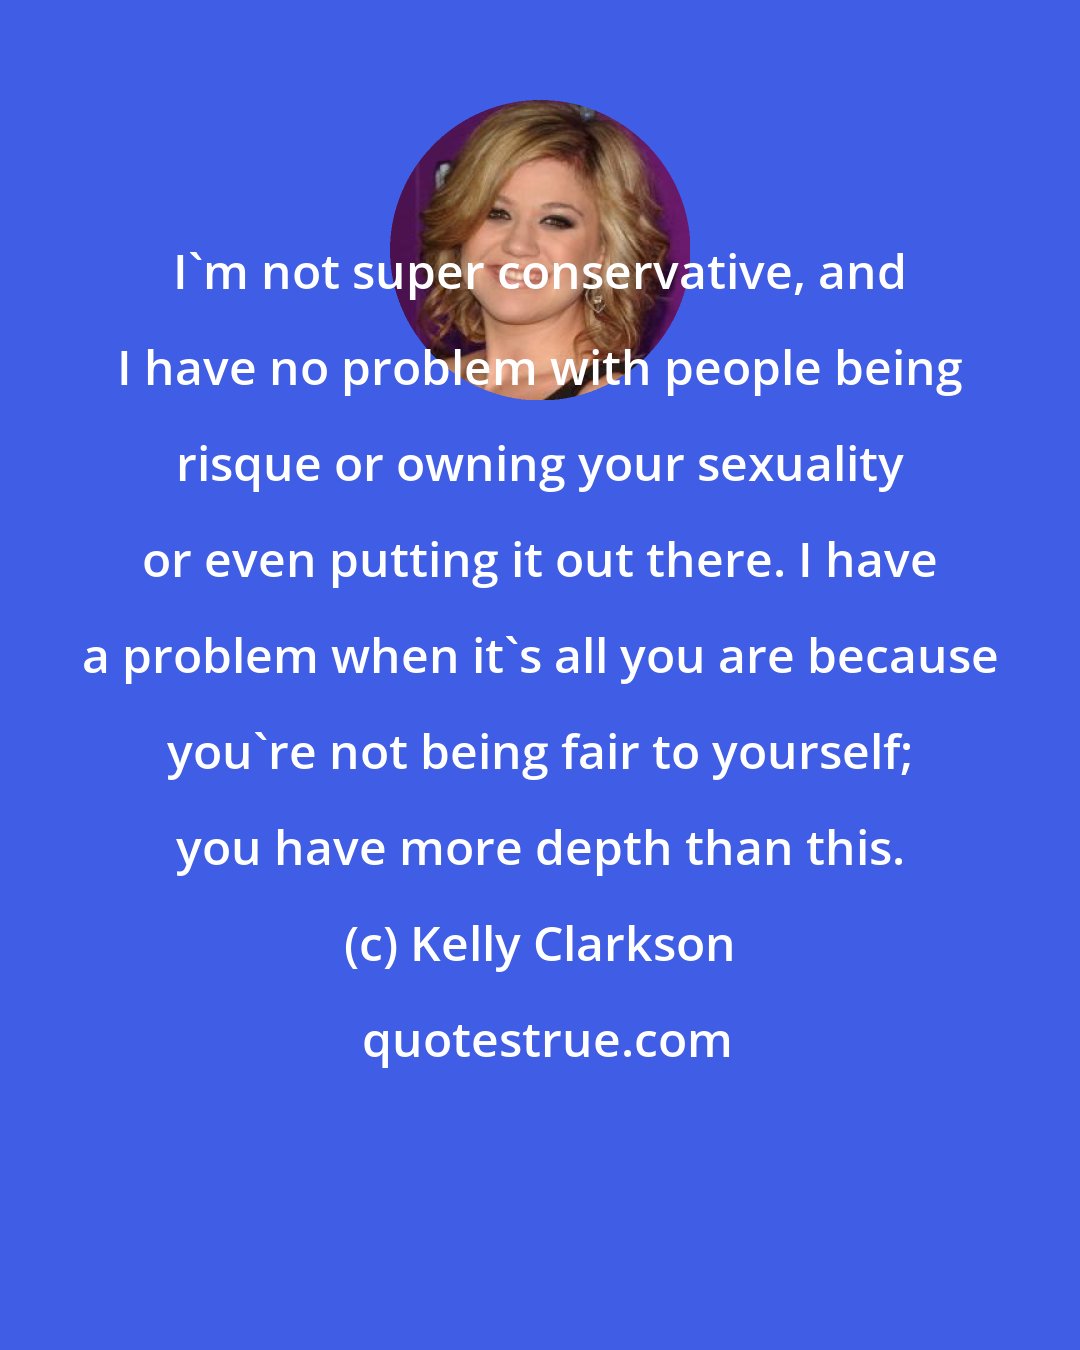 Kelly Clarkson: I'm not super conservative, and I have no problem with people being risque or owning your sexuality or even putting it out there. I have a problem when it's all you are because you're not being fair to yourself; you have more depth than this.